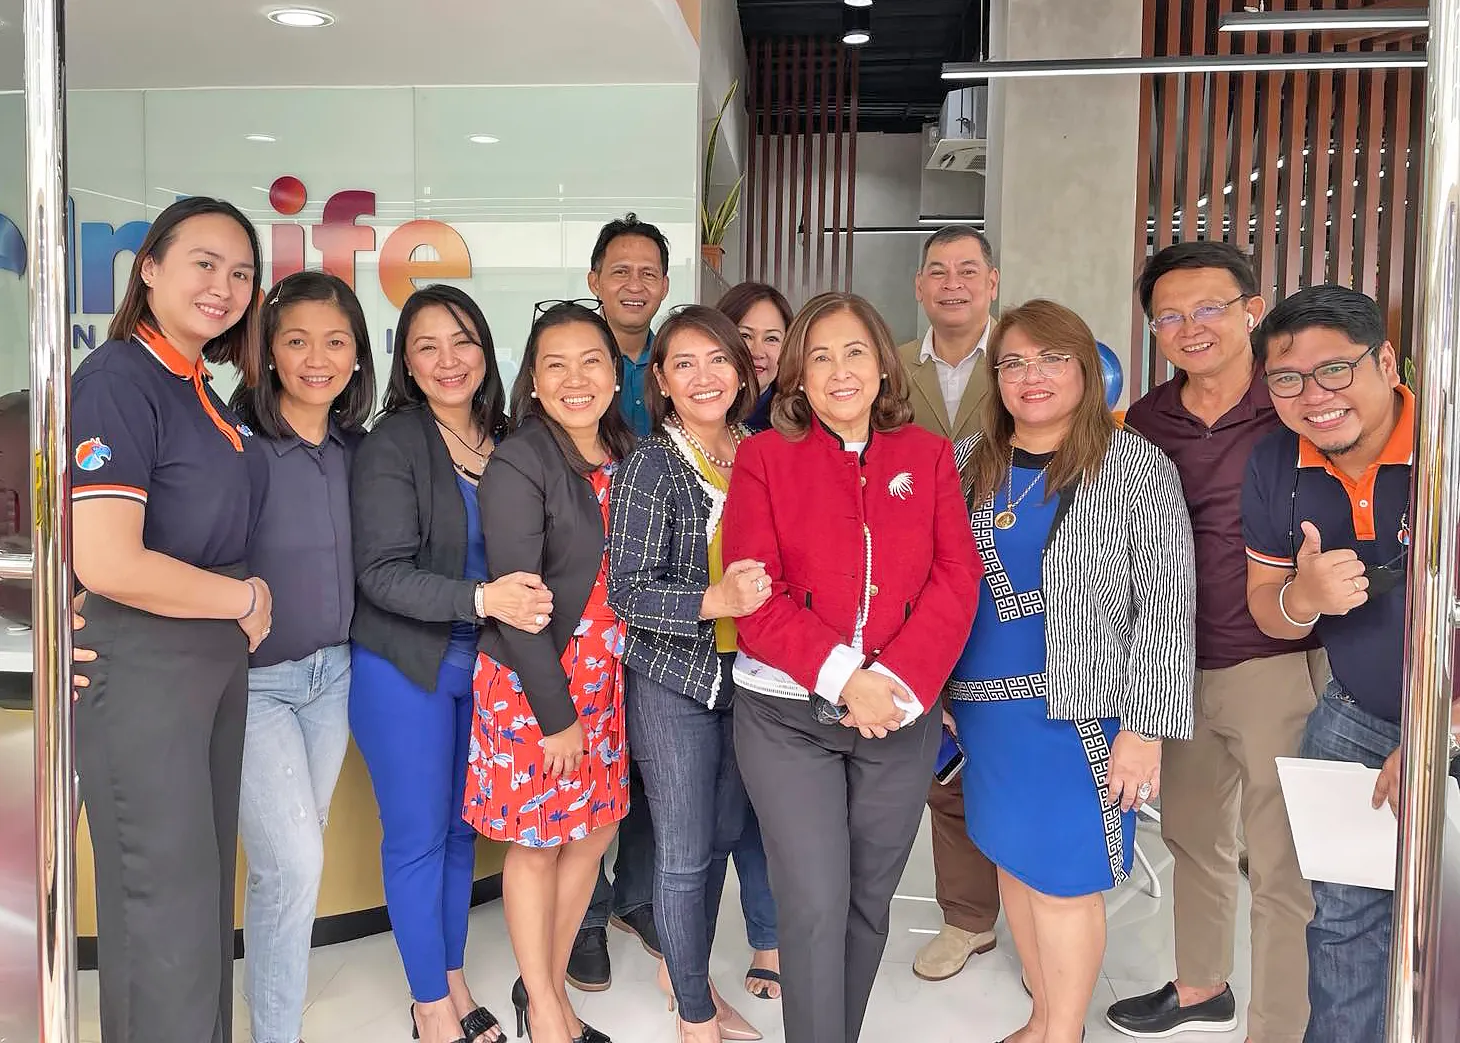 inlife-expands-business-in-the-visayas-plans-to-recruit-400-new-financial-advisors-from-cebu